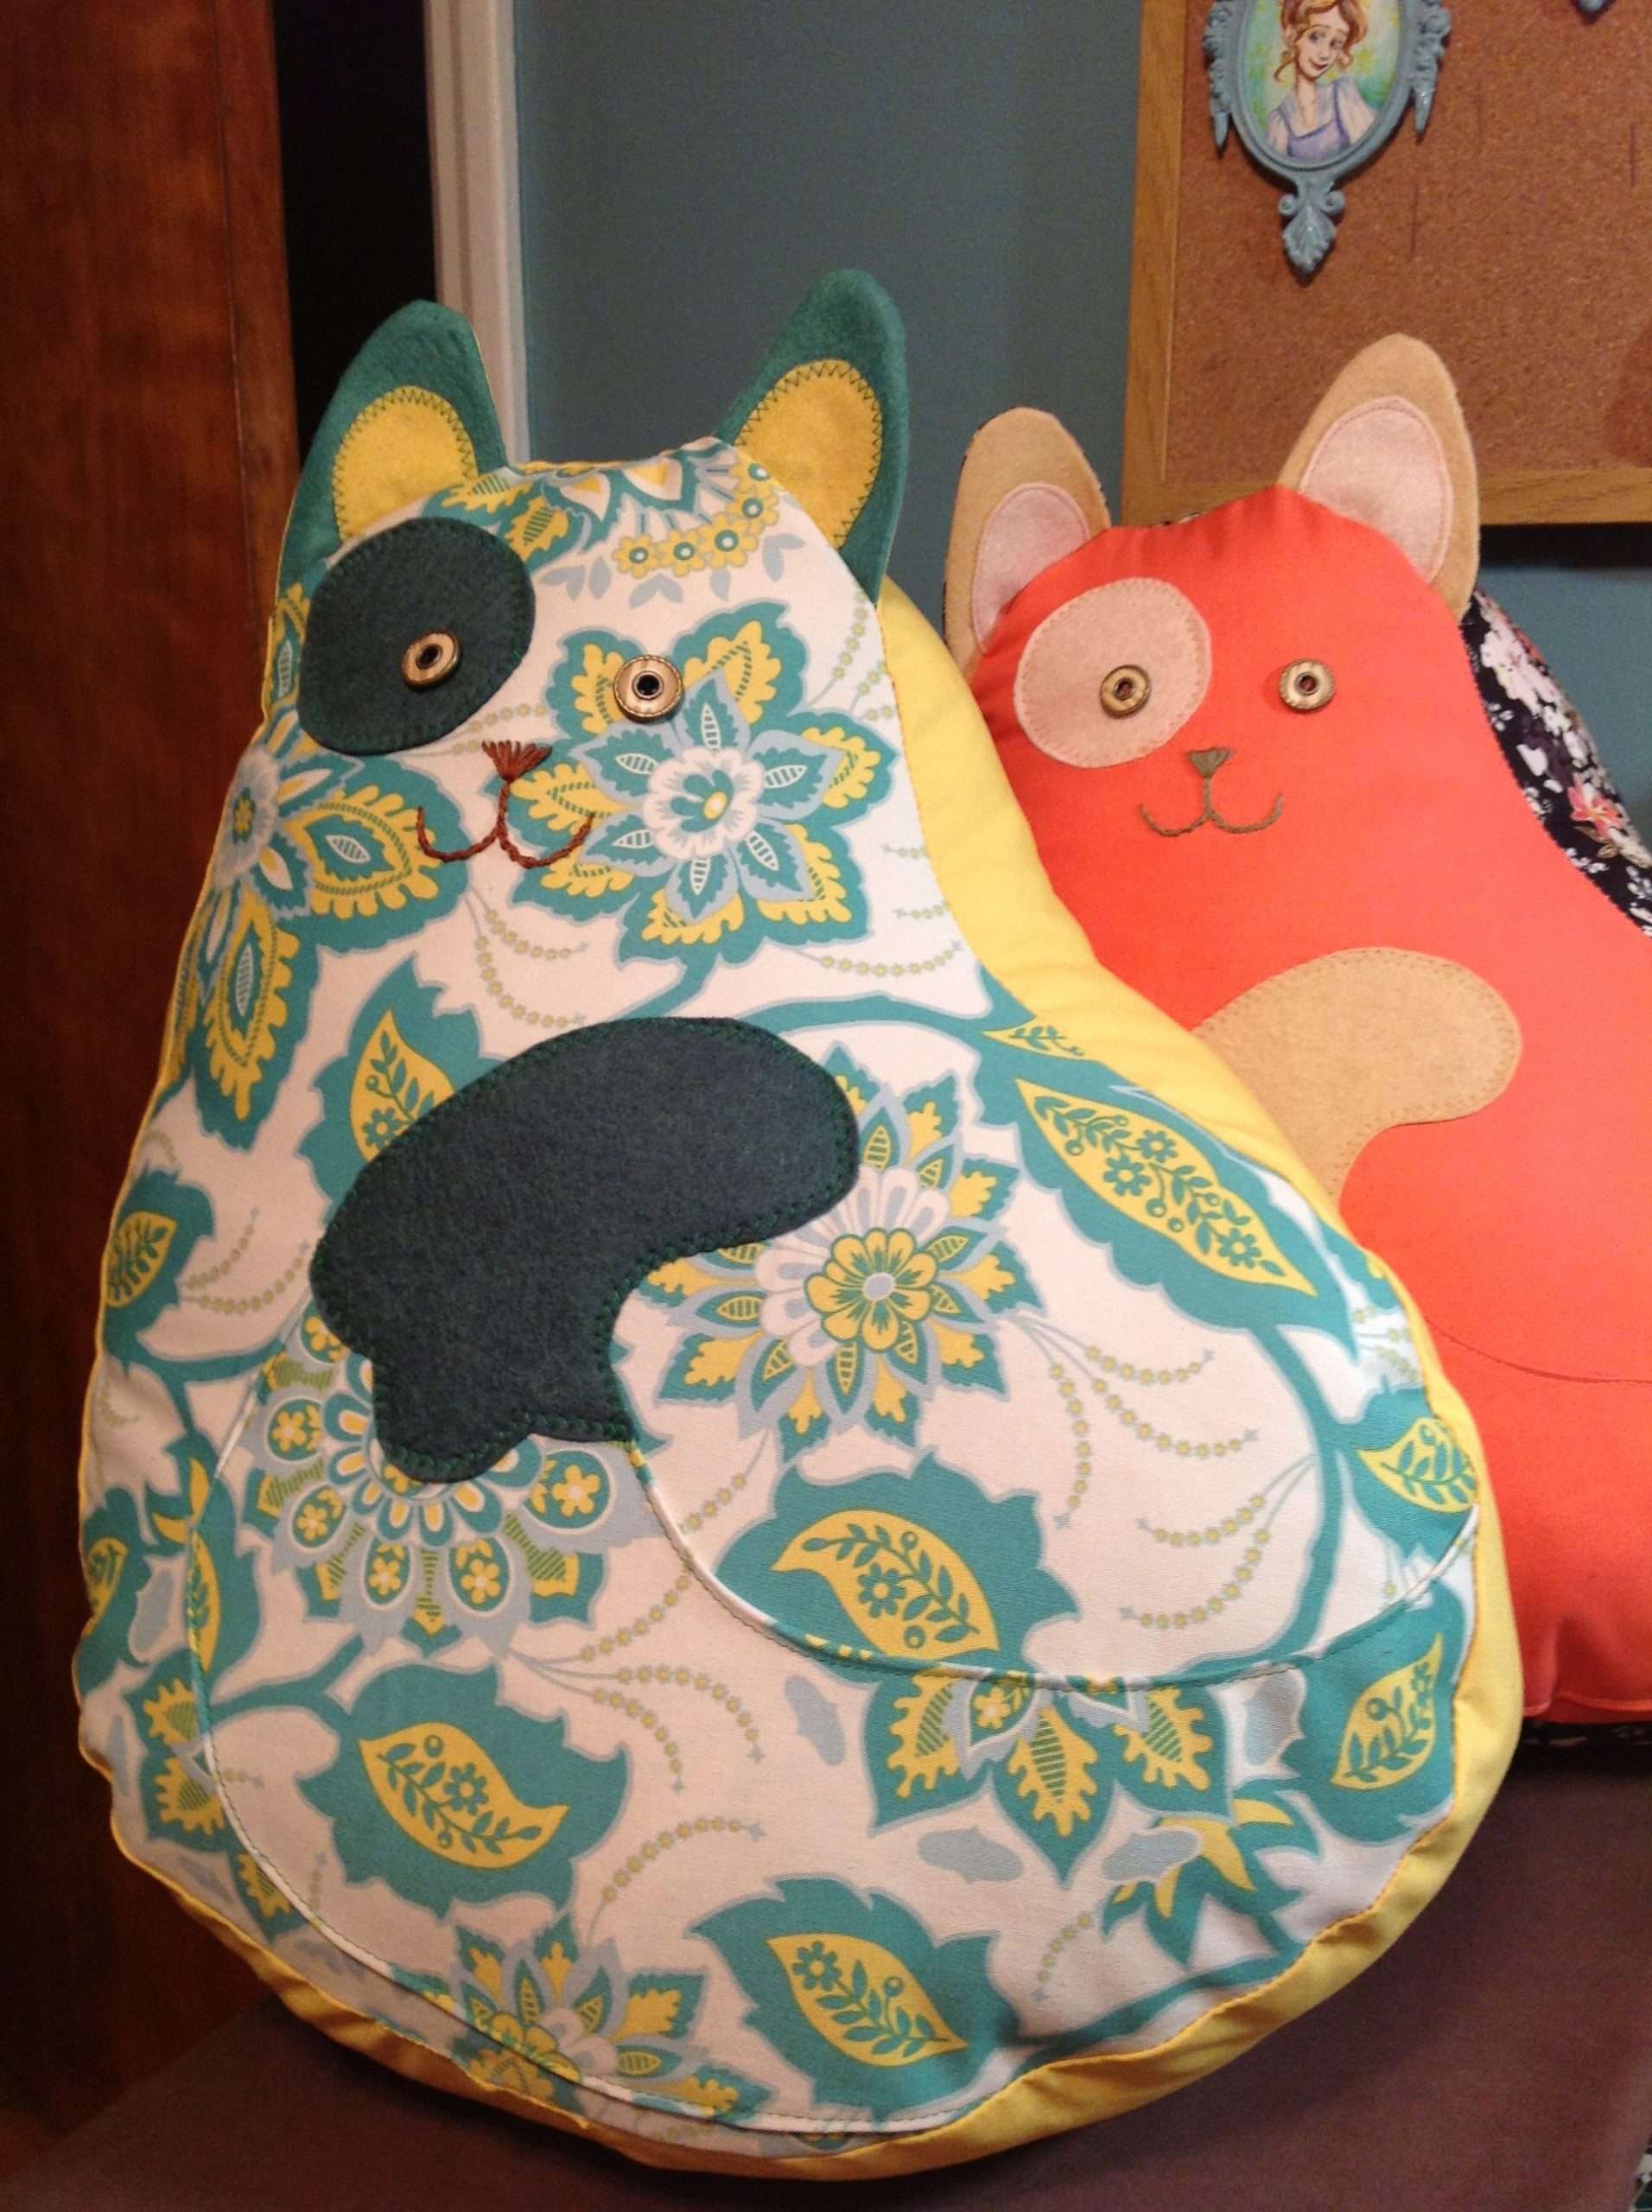 Cat pillows. I want to figure out how to make these.